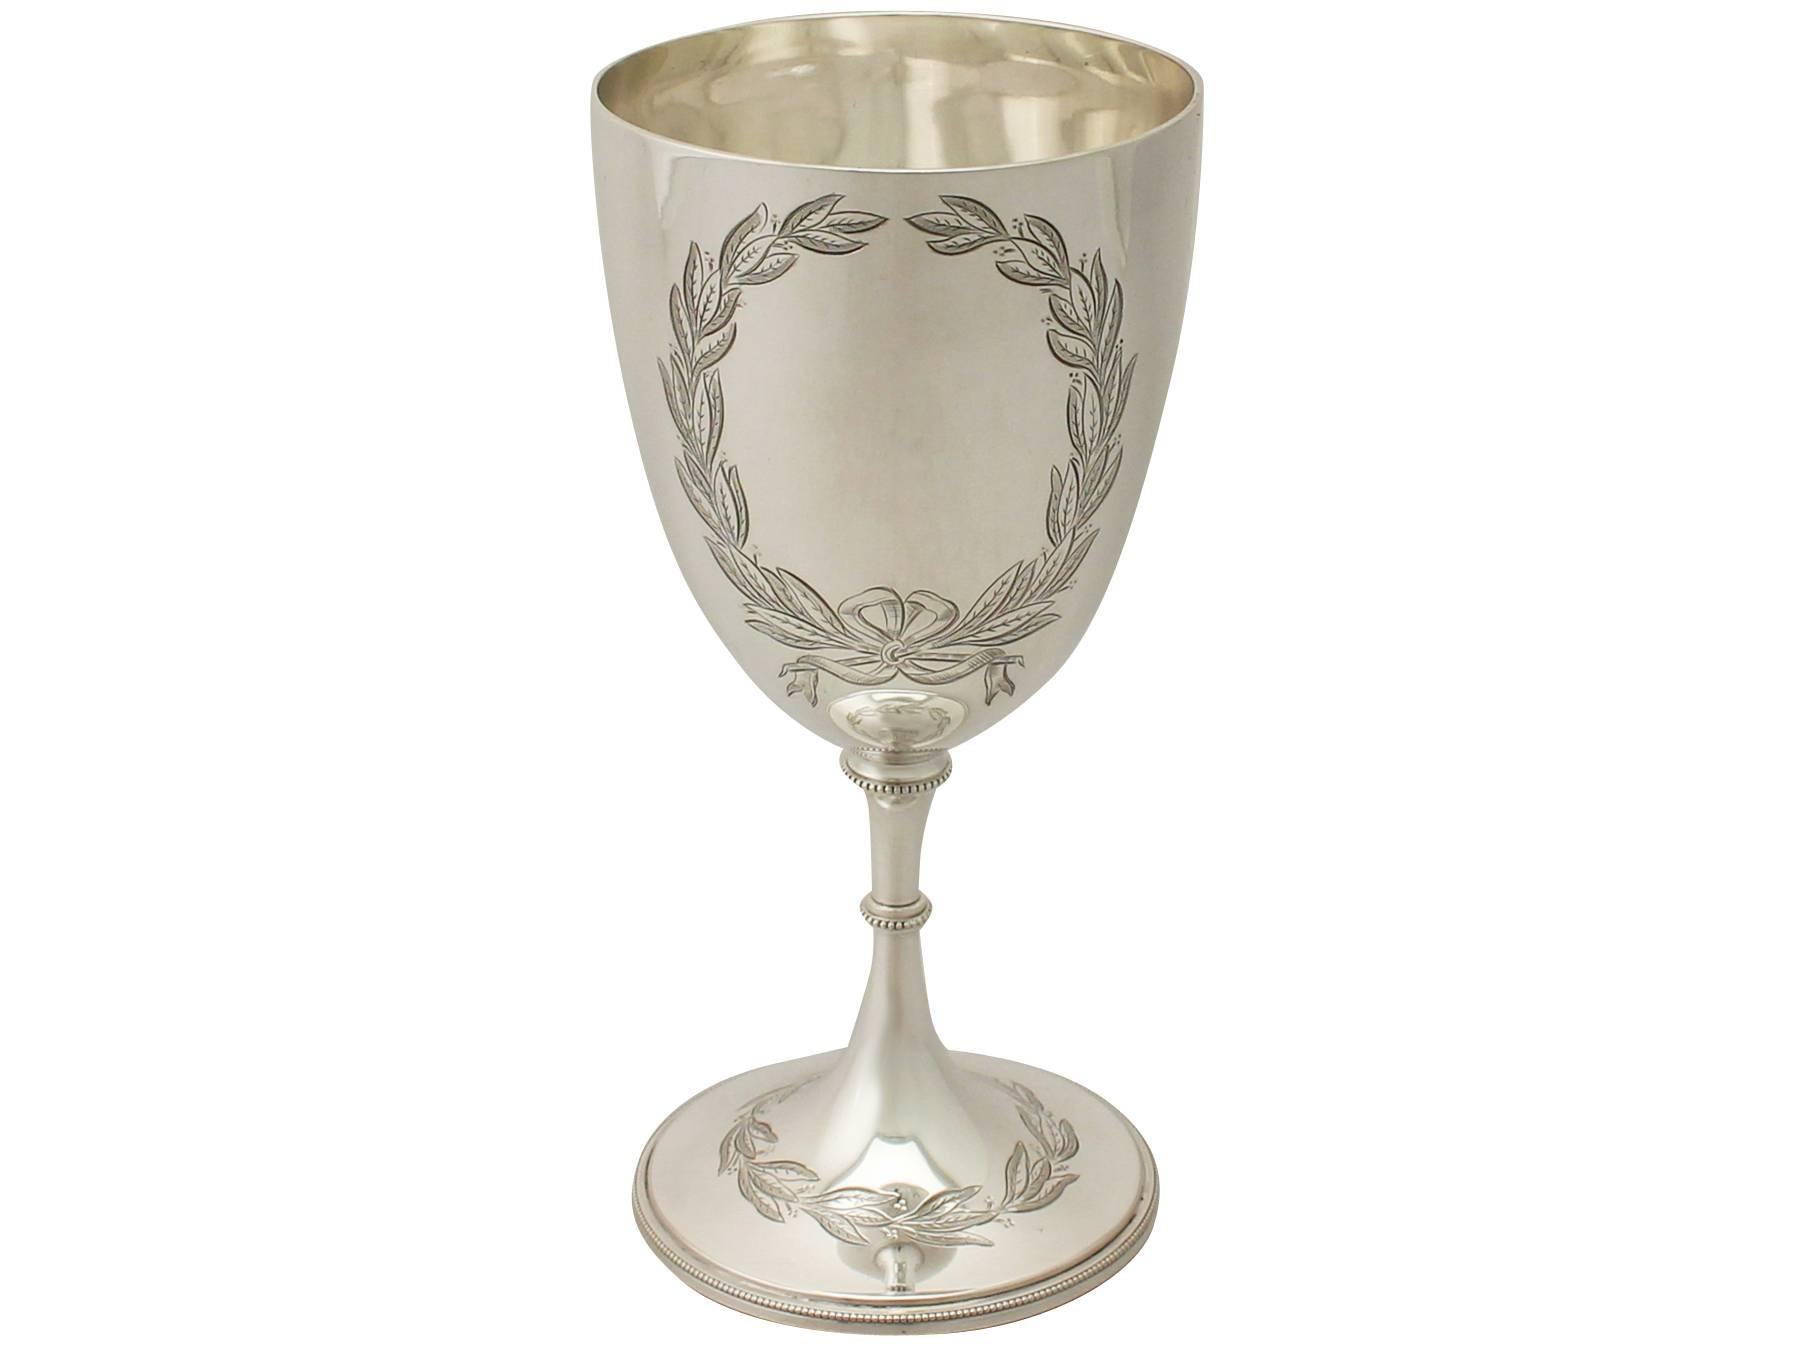 An exceptional, fine and impressive antique Victorian English sterling silver wine goblet; an addition to our collection of wine and drinks related silverware.

This exceptional antique Victorian sterling silver wine goblet has a circular bell